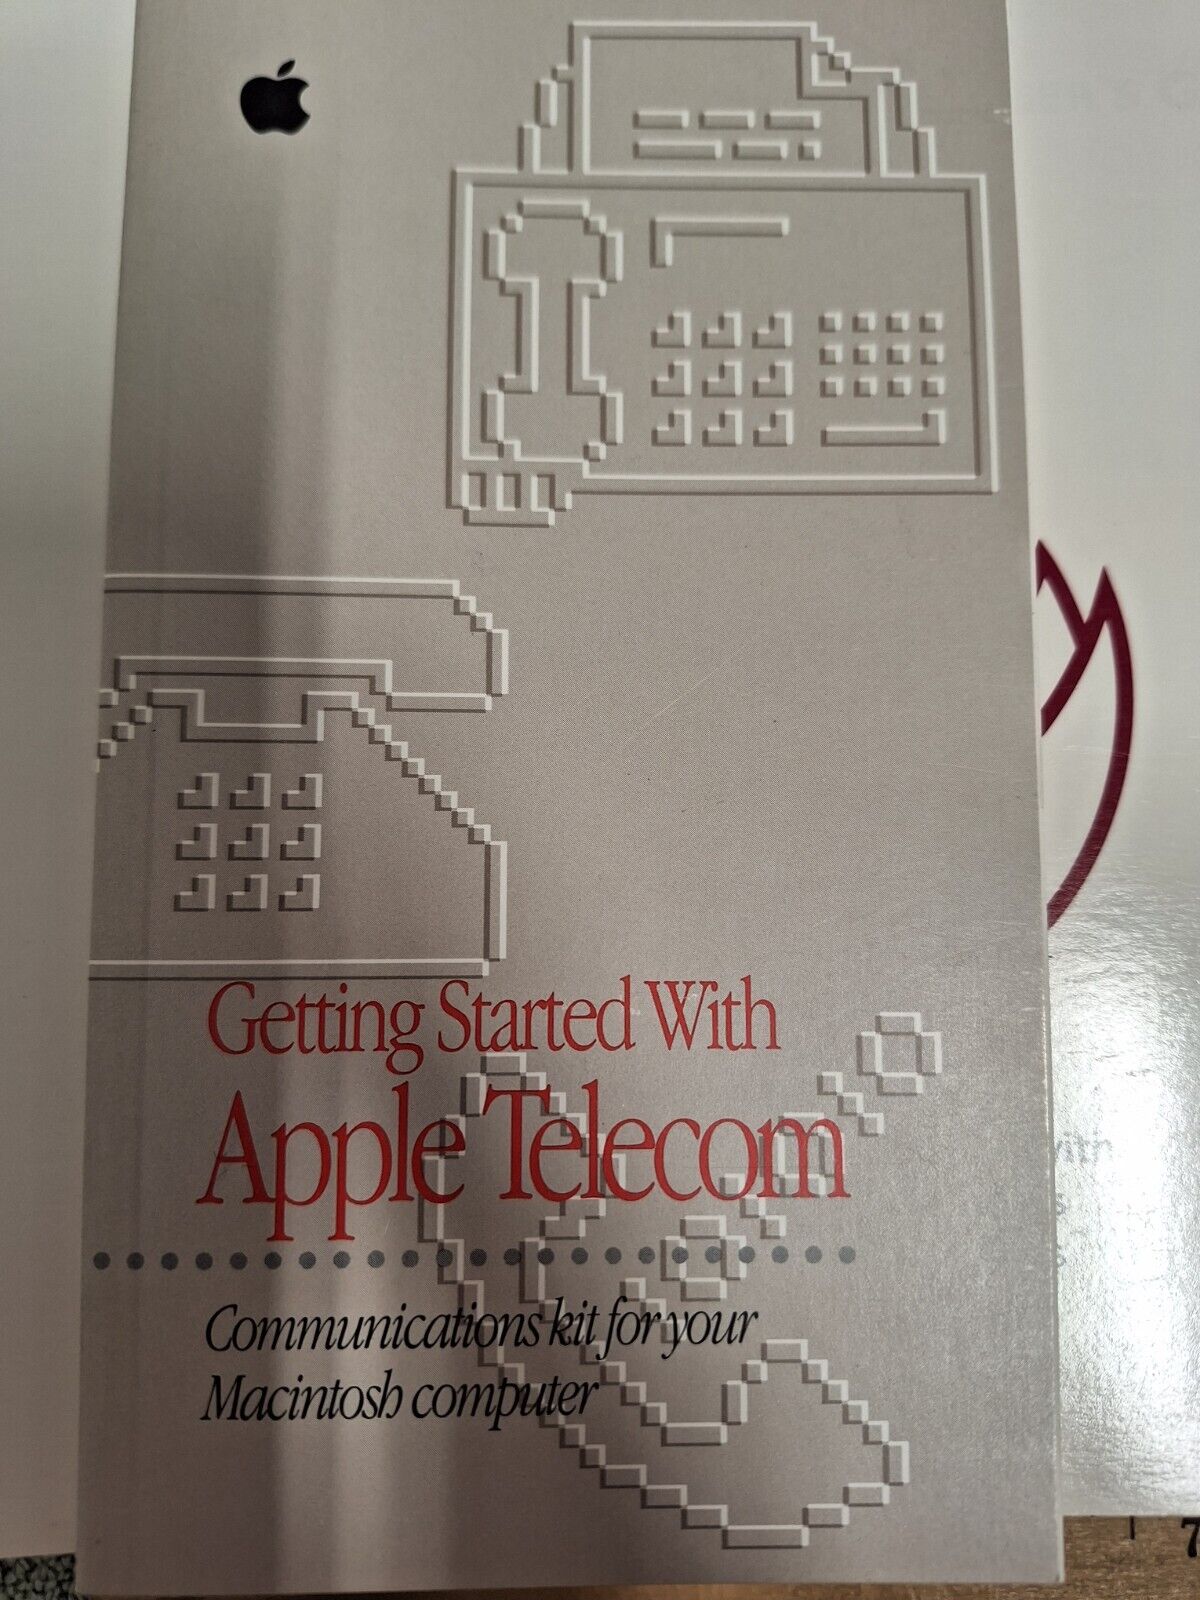 getting started with apple telecom, macintosh, 1996